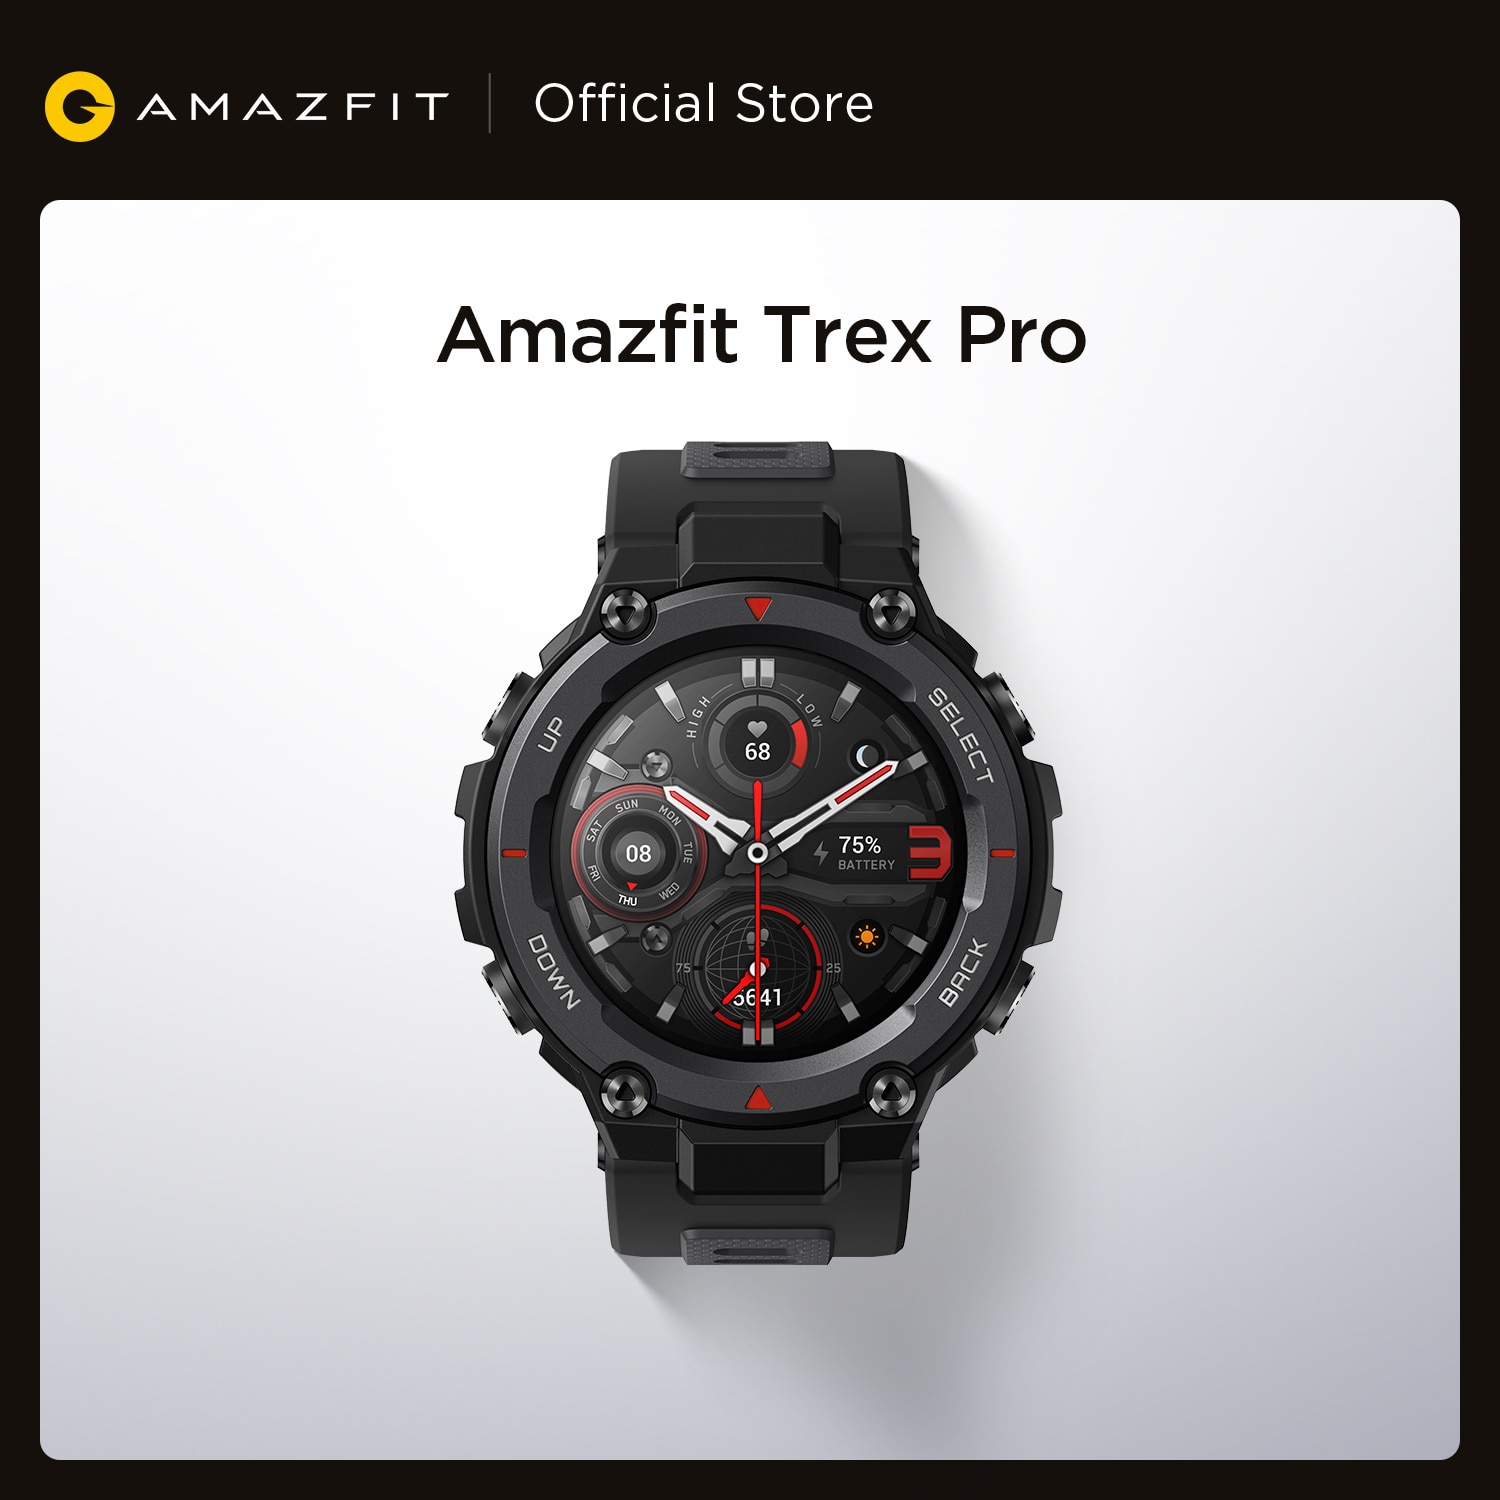 New Amazfit T rex Trex Pro T Rex GPS Outdoor Smartwatch Waterproof 18 day Battery Life 390mAh Smart Watch For Android iOS Phone|Smart Watches| - AliExpress